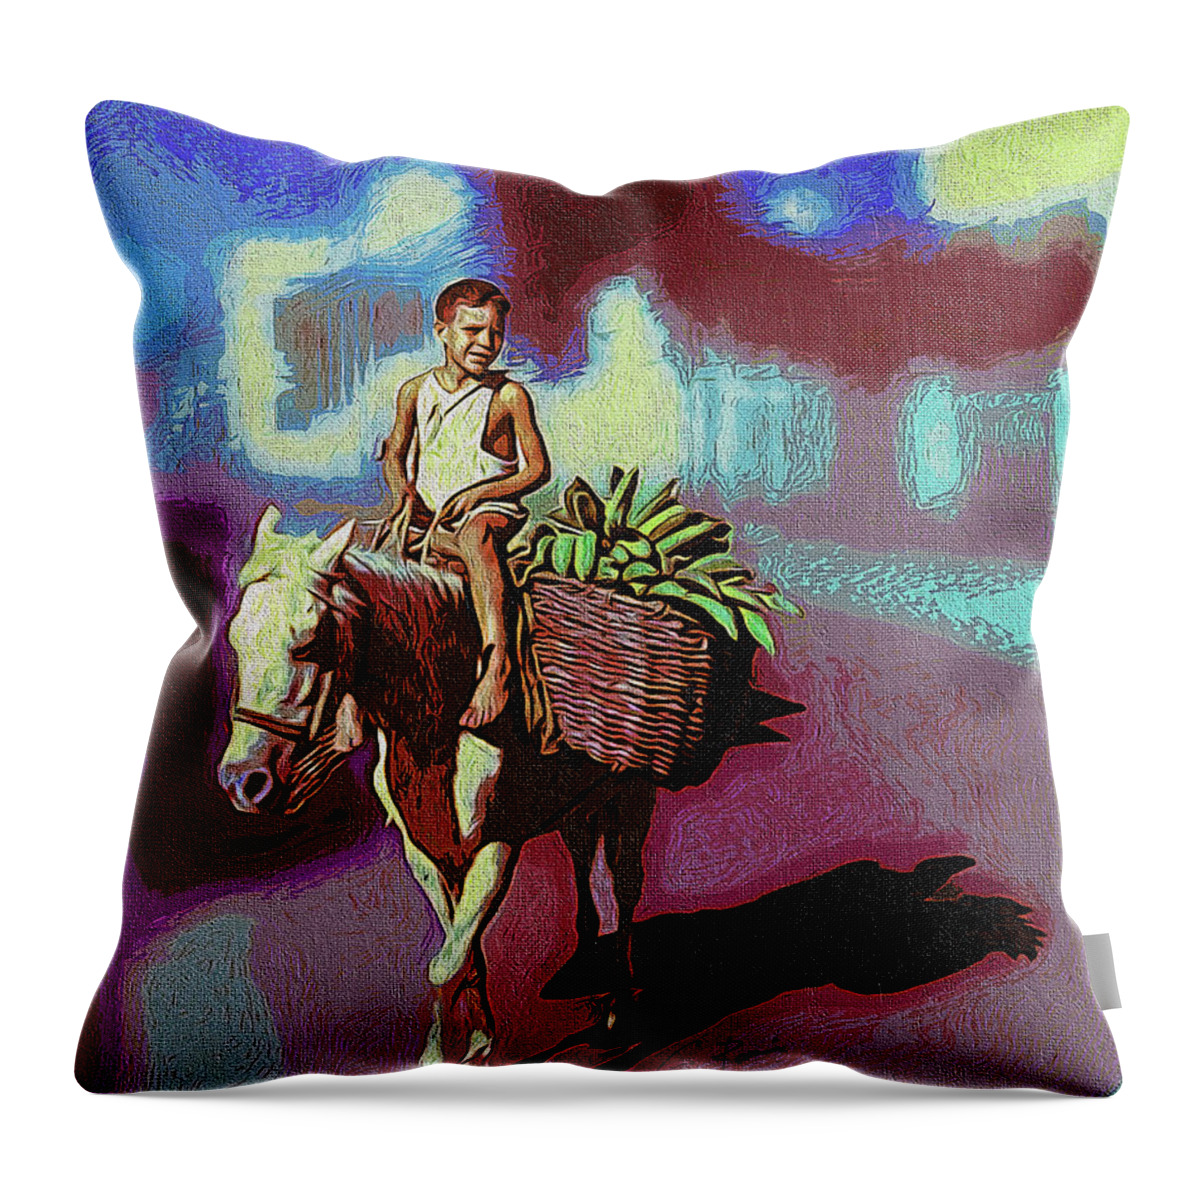 Market Throw Pillow featuring the digital art To the marquet by Charlie Roman